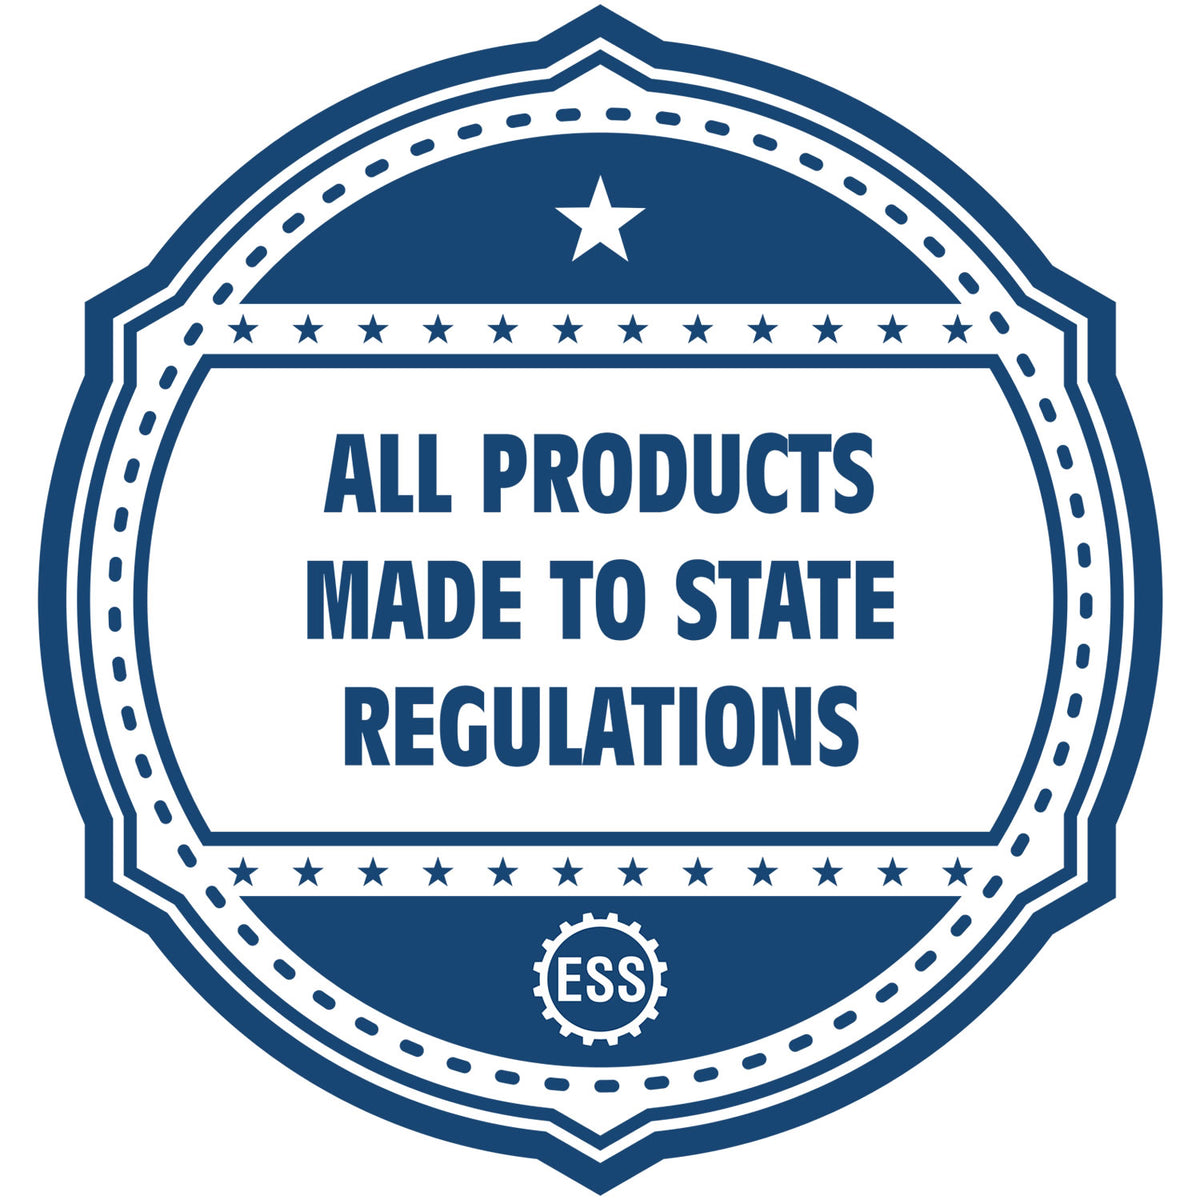 An icon or badge element for the Long Reach Arizona PE Seal showing that this product is made in compliance with state regulations.